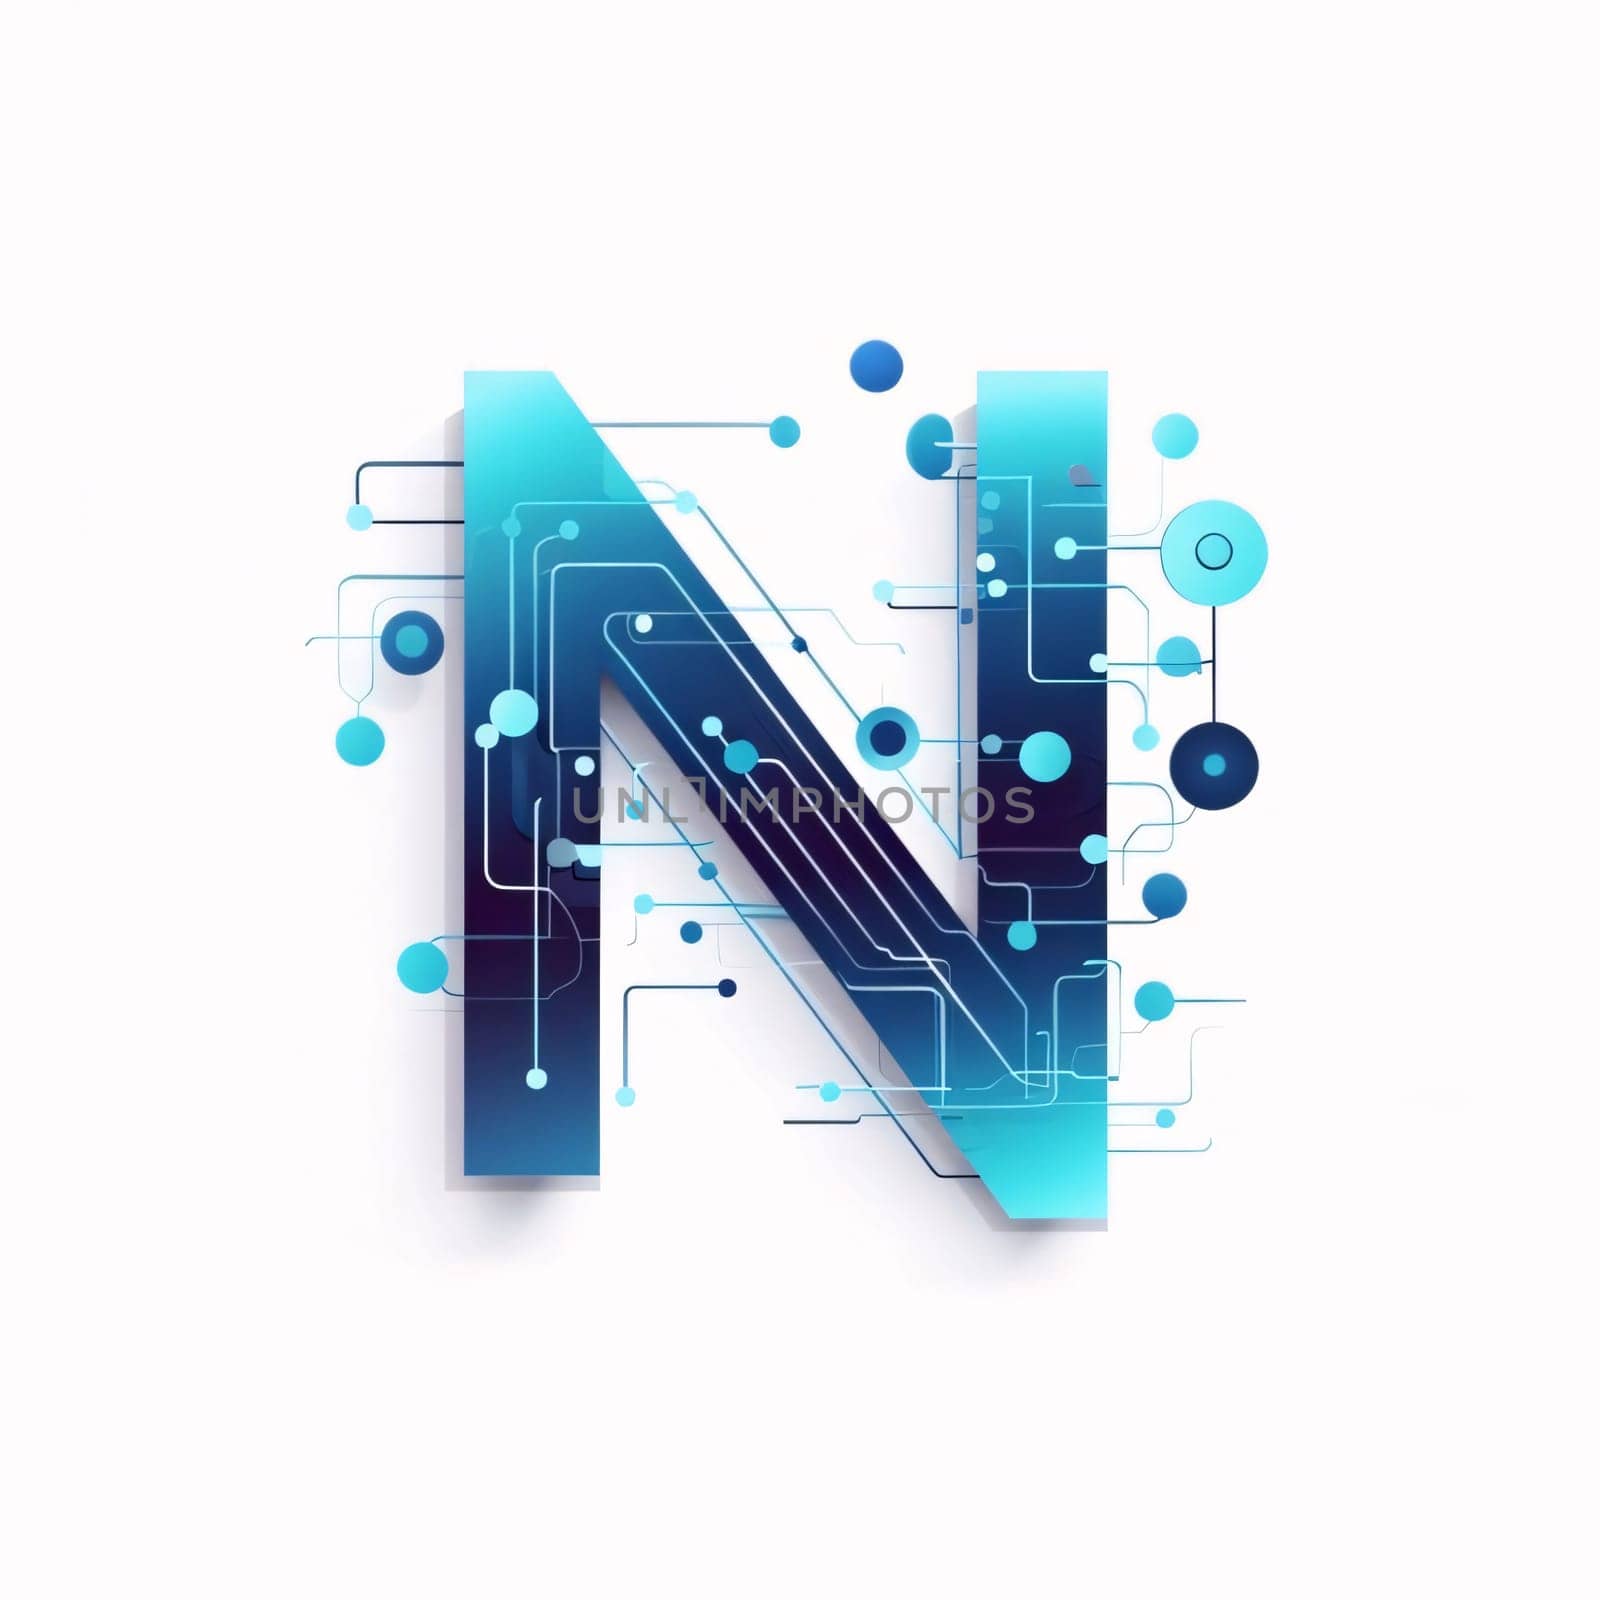 Graphic alphabet letters: Letter N made of electronic circuit on white background. Vector illustration.